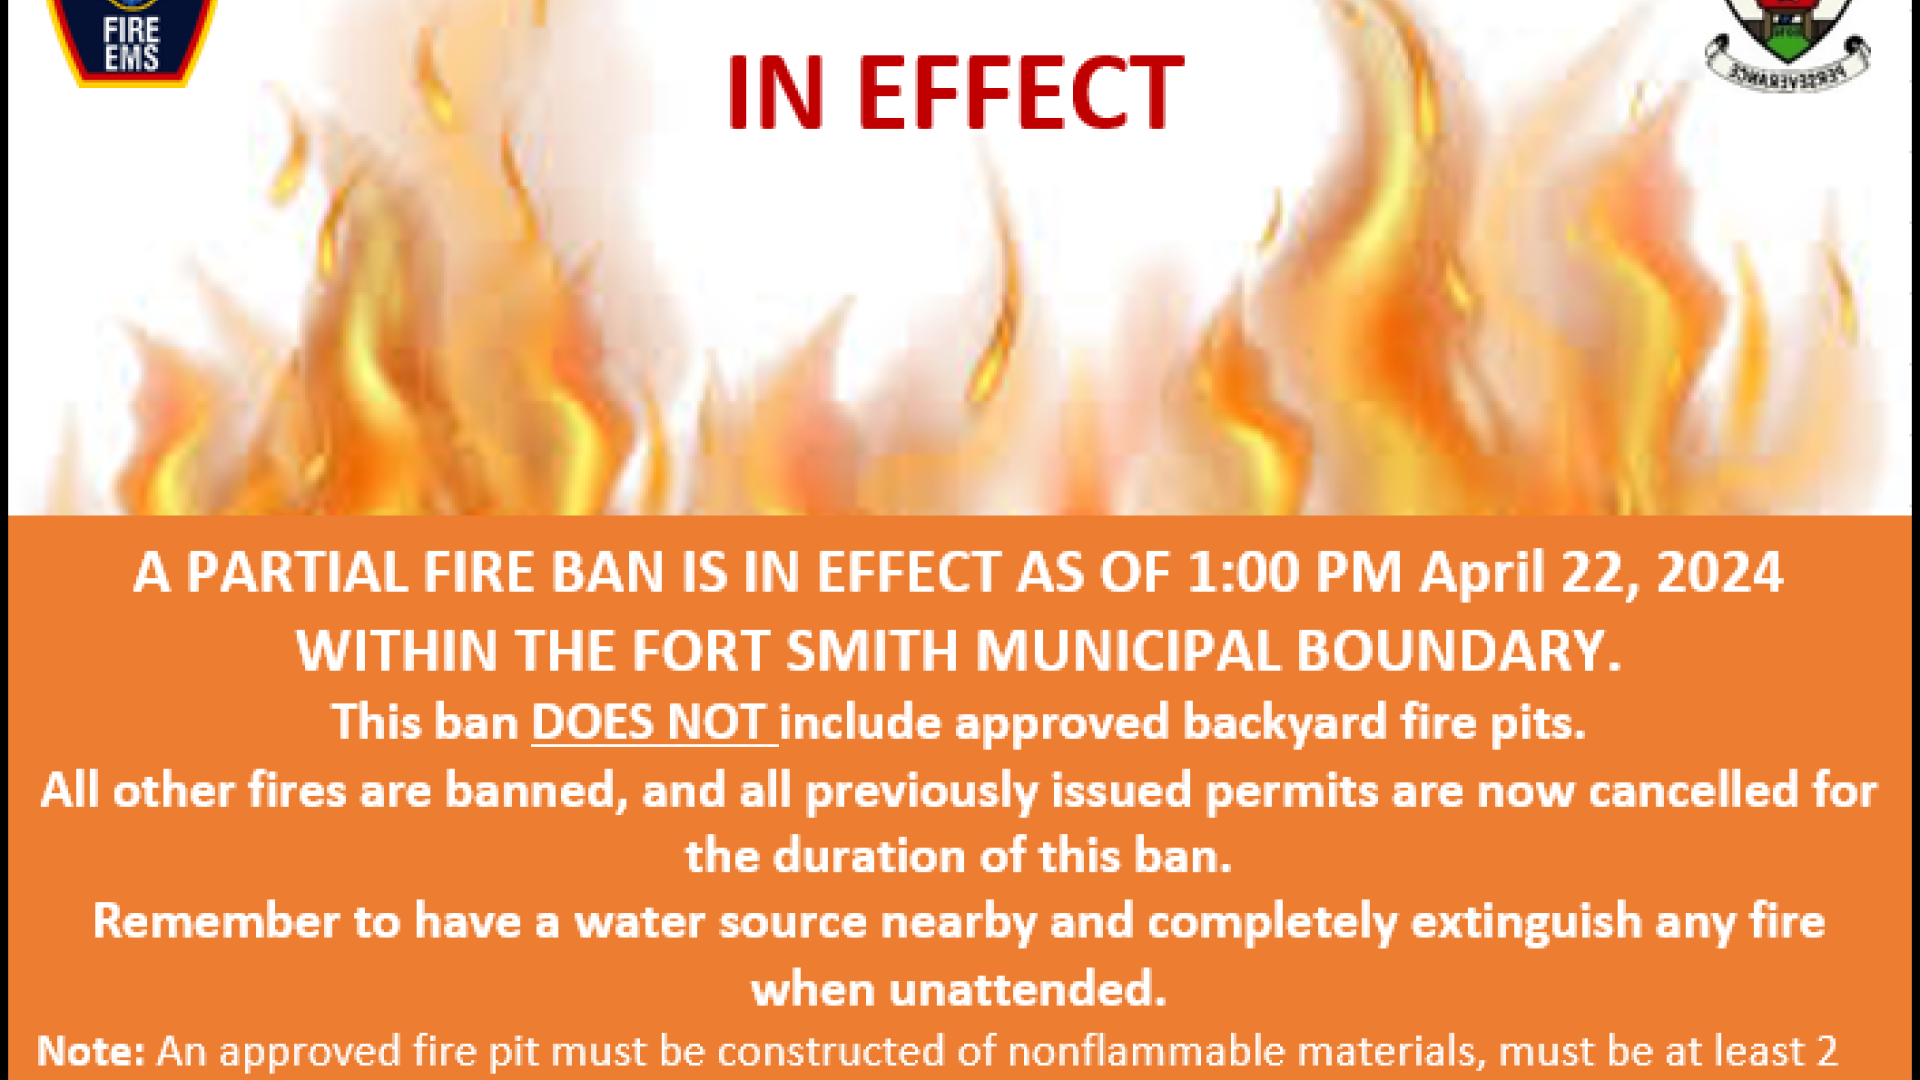 Public Notice - A partial fire ban is in effect as of 1:00pm April 22, 2024